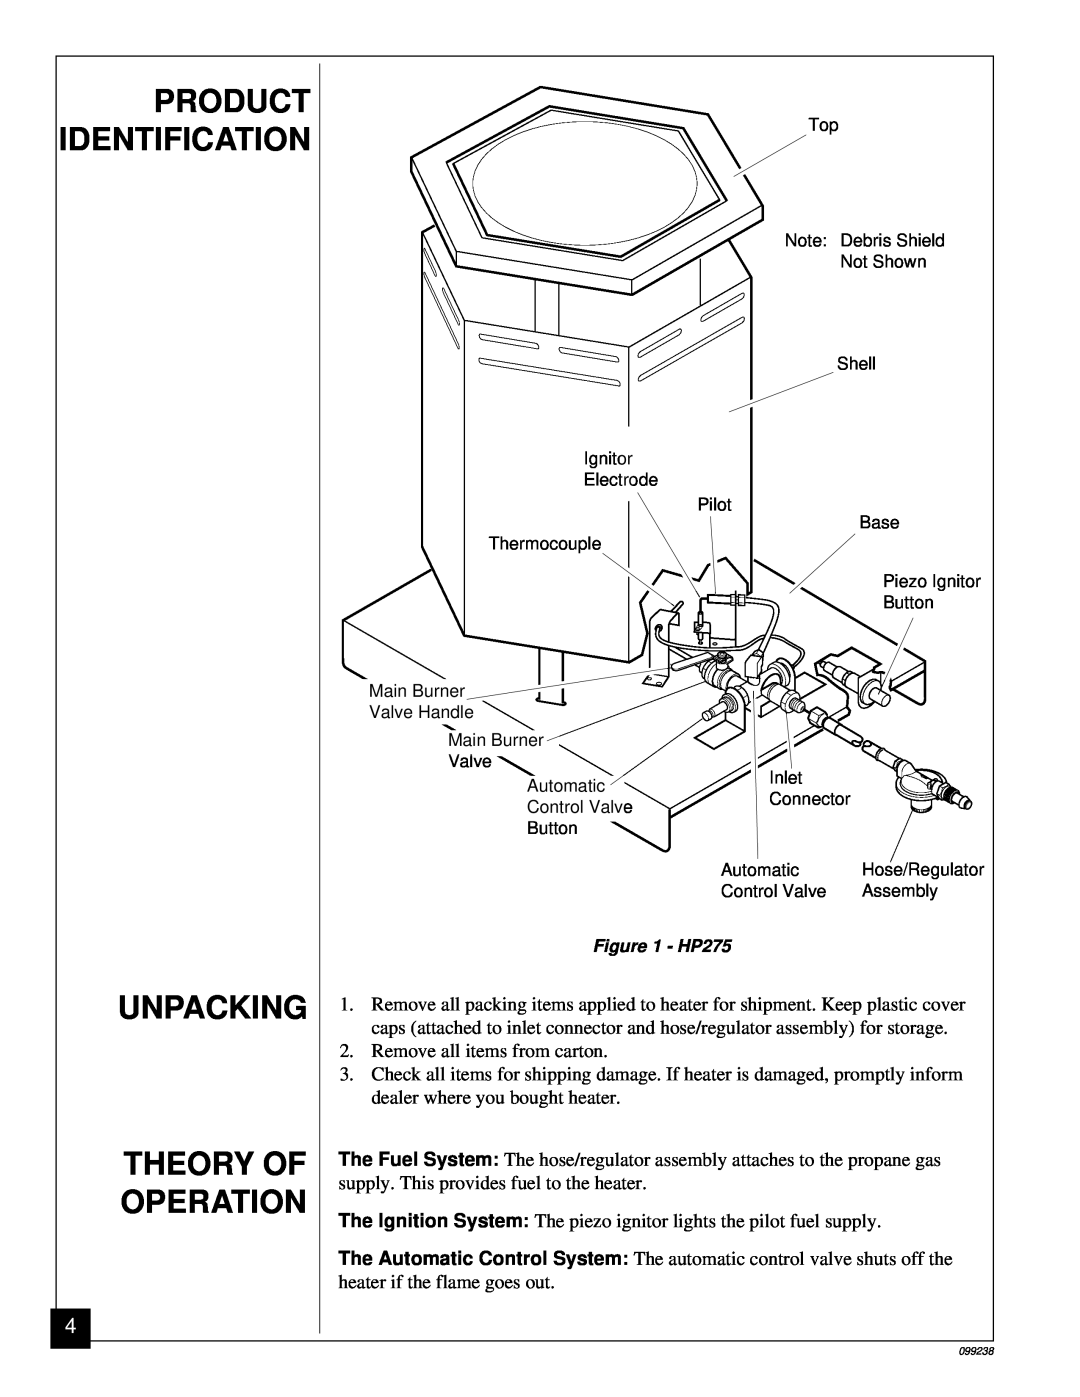 Homelite HP275 owner manual Product, Unpacking, Theory Of, Operation, Identification, LP-PFA/PV013A 